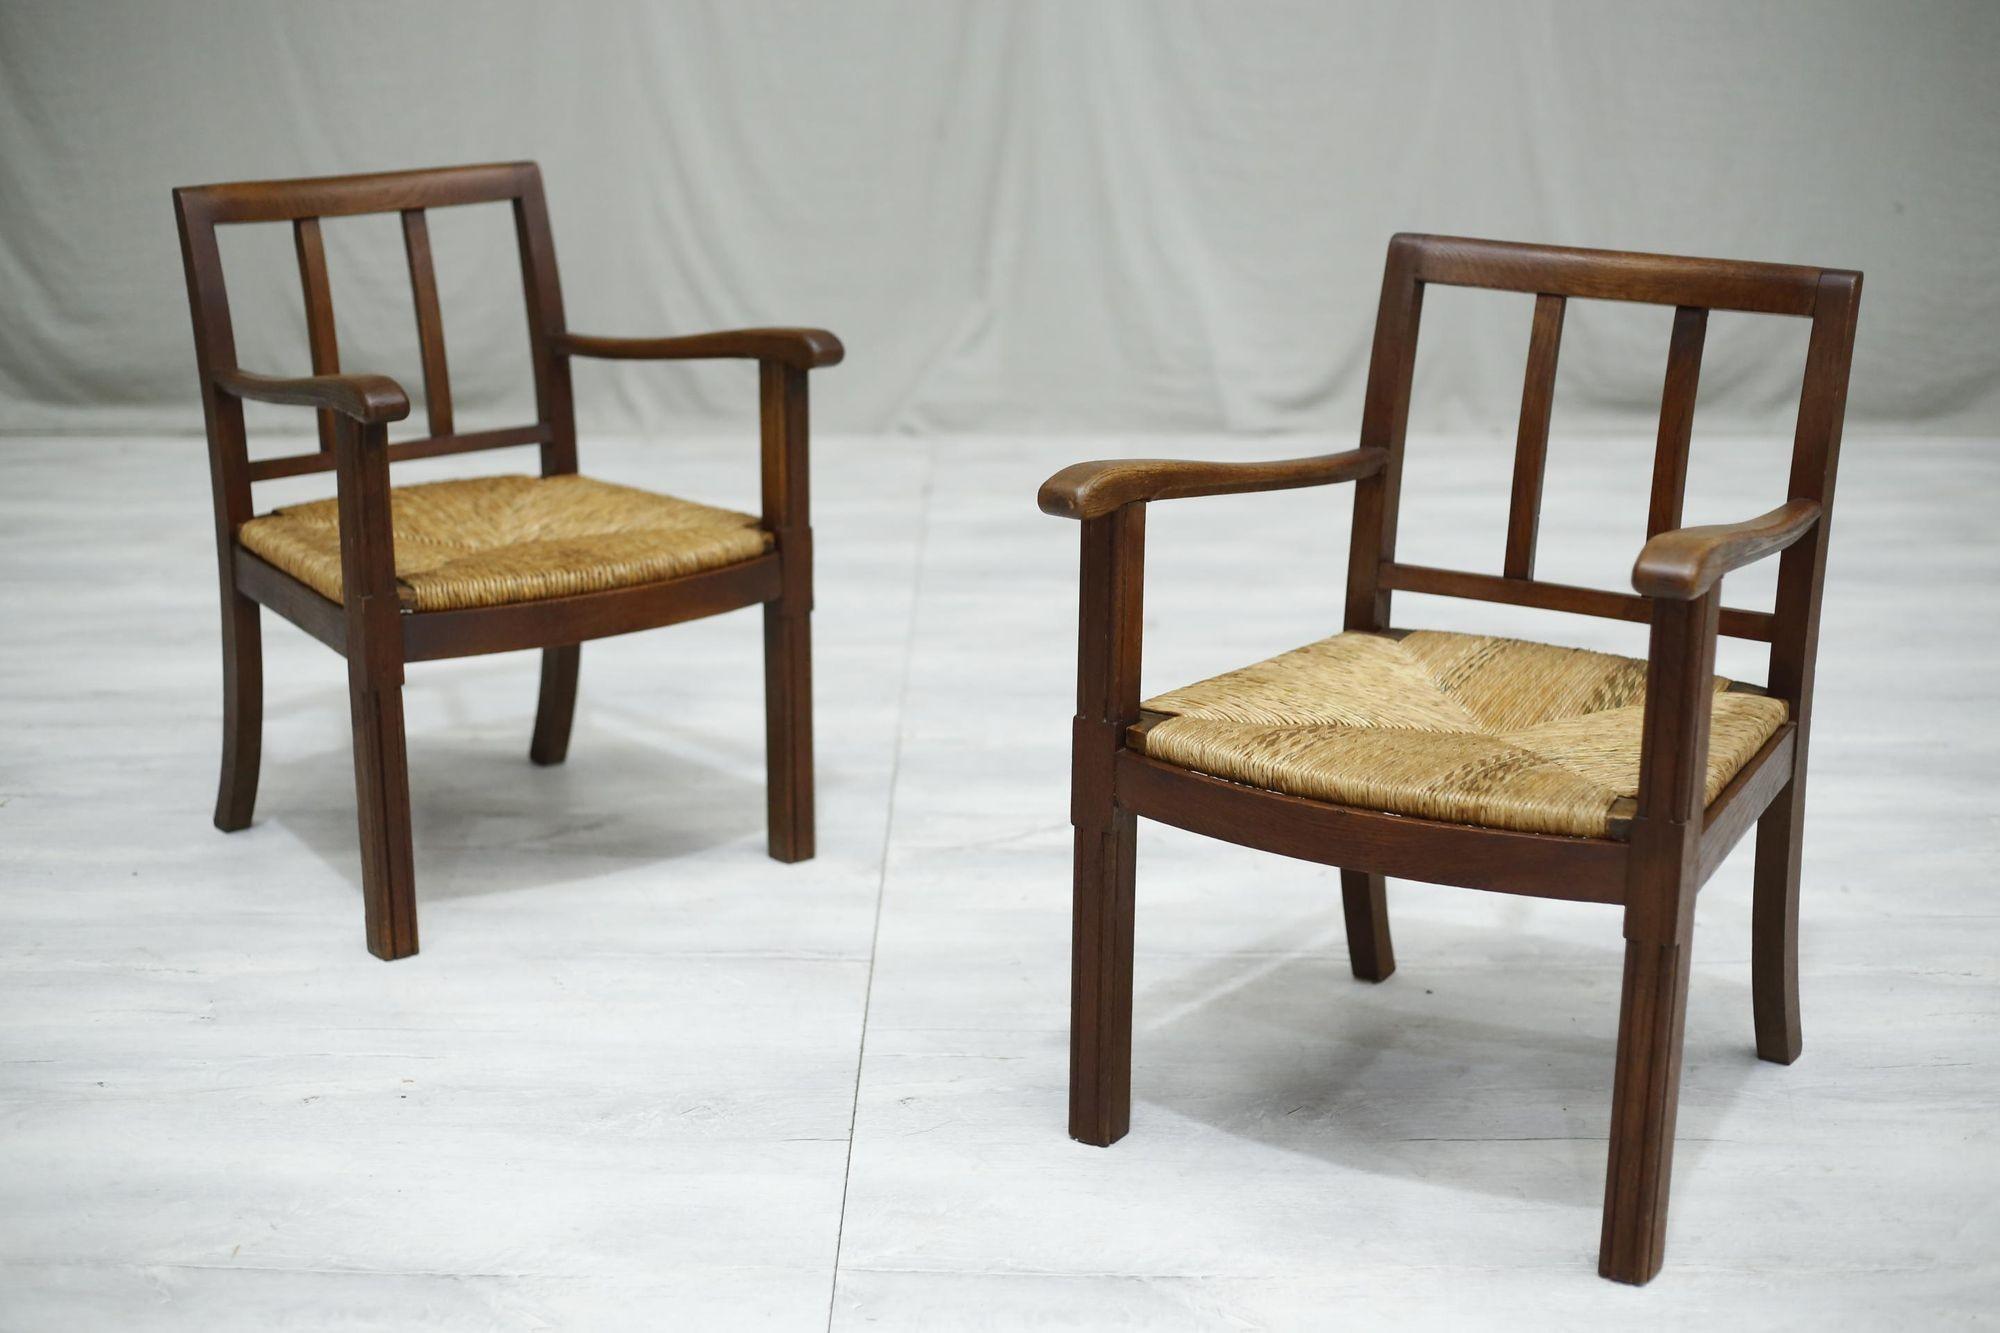 These are a very stylish pair of 1940's brutalist rush seated lounge chairs.

They have a heavy frame which I believe is made from oak and has a stunning patination to it.

Great quality overall and solid construction so you can use daily but even